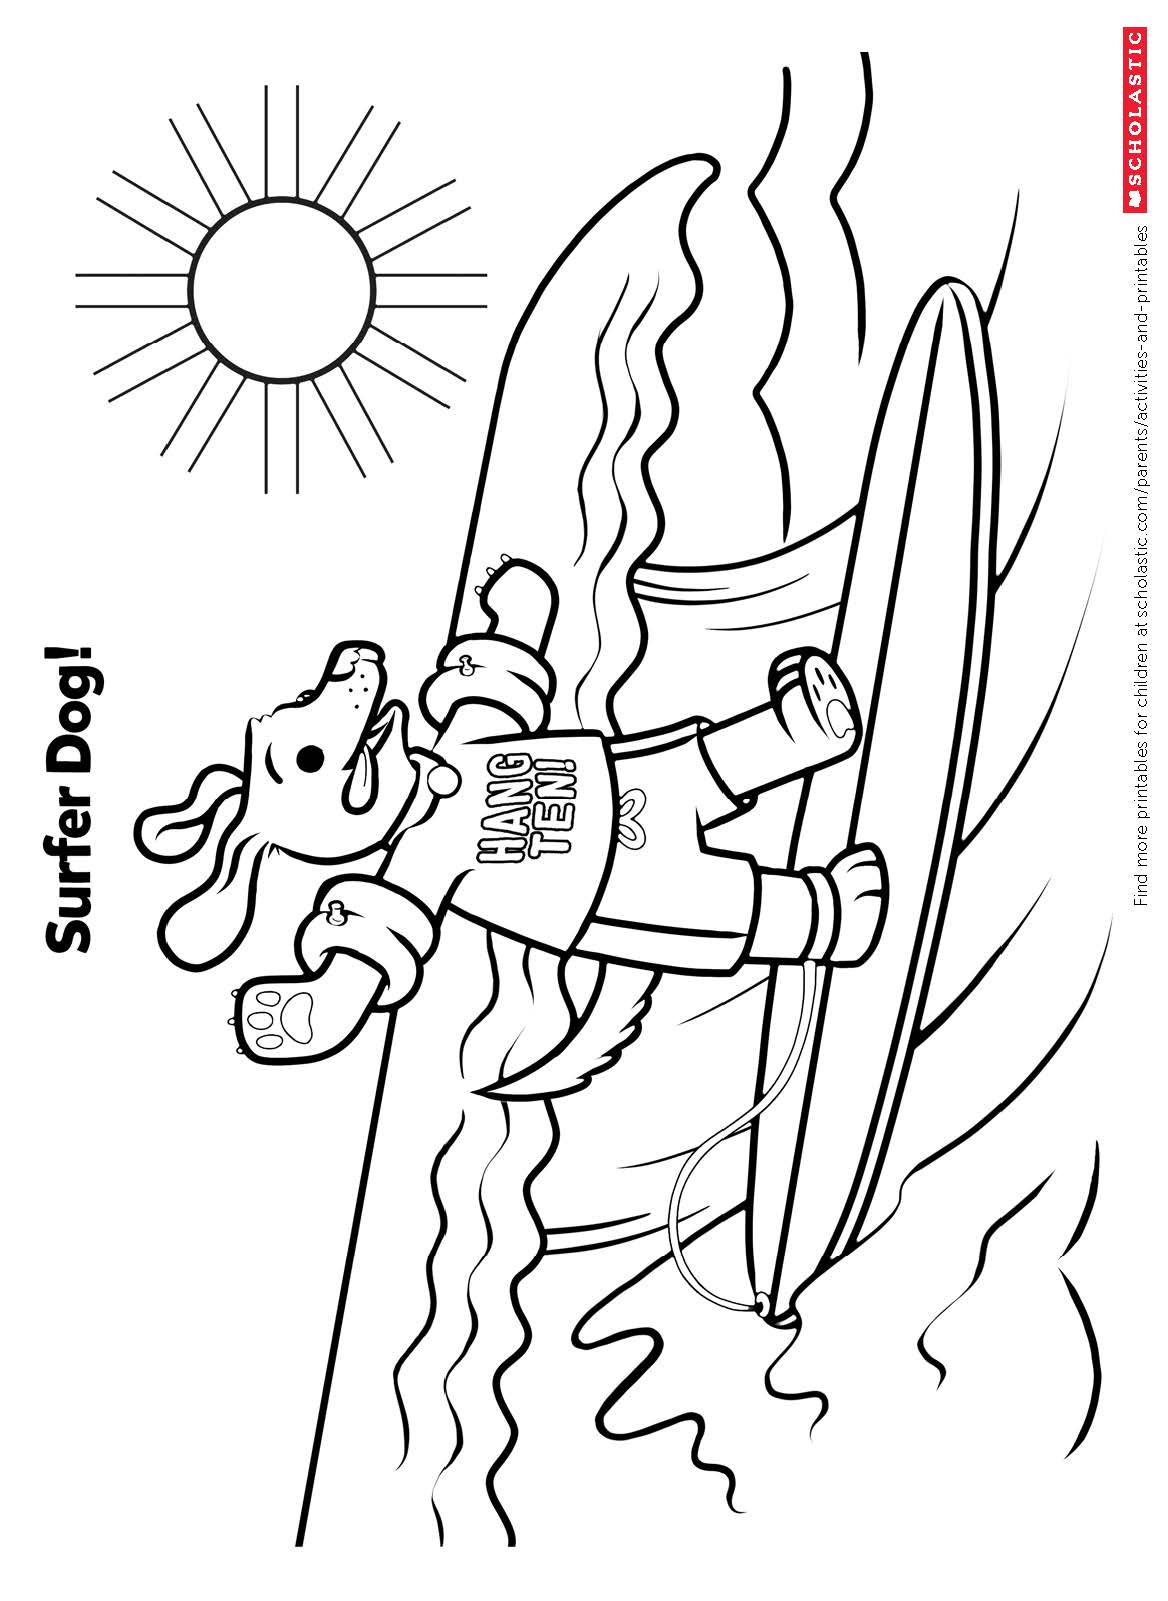 Hang Ten With This Surfing Coloring Sheet | Worksheets & Printables